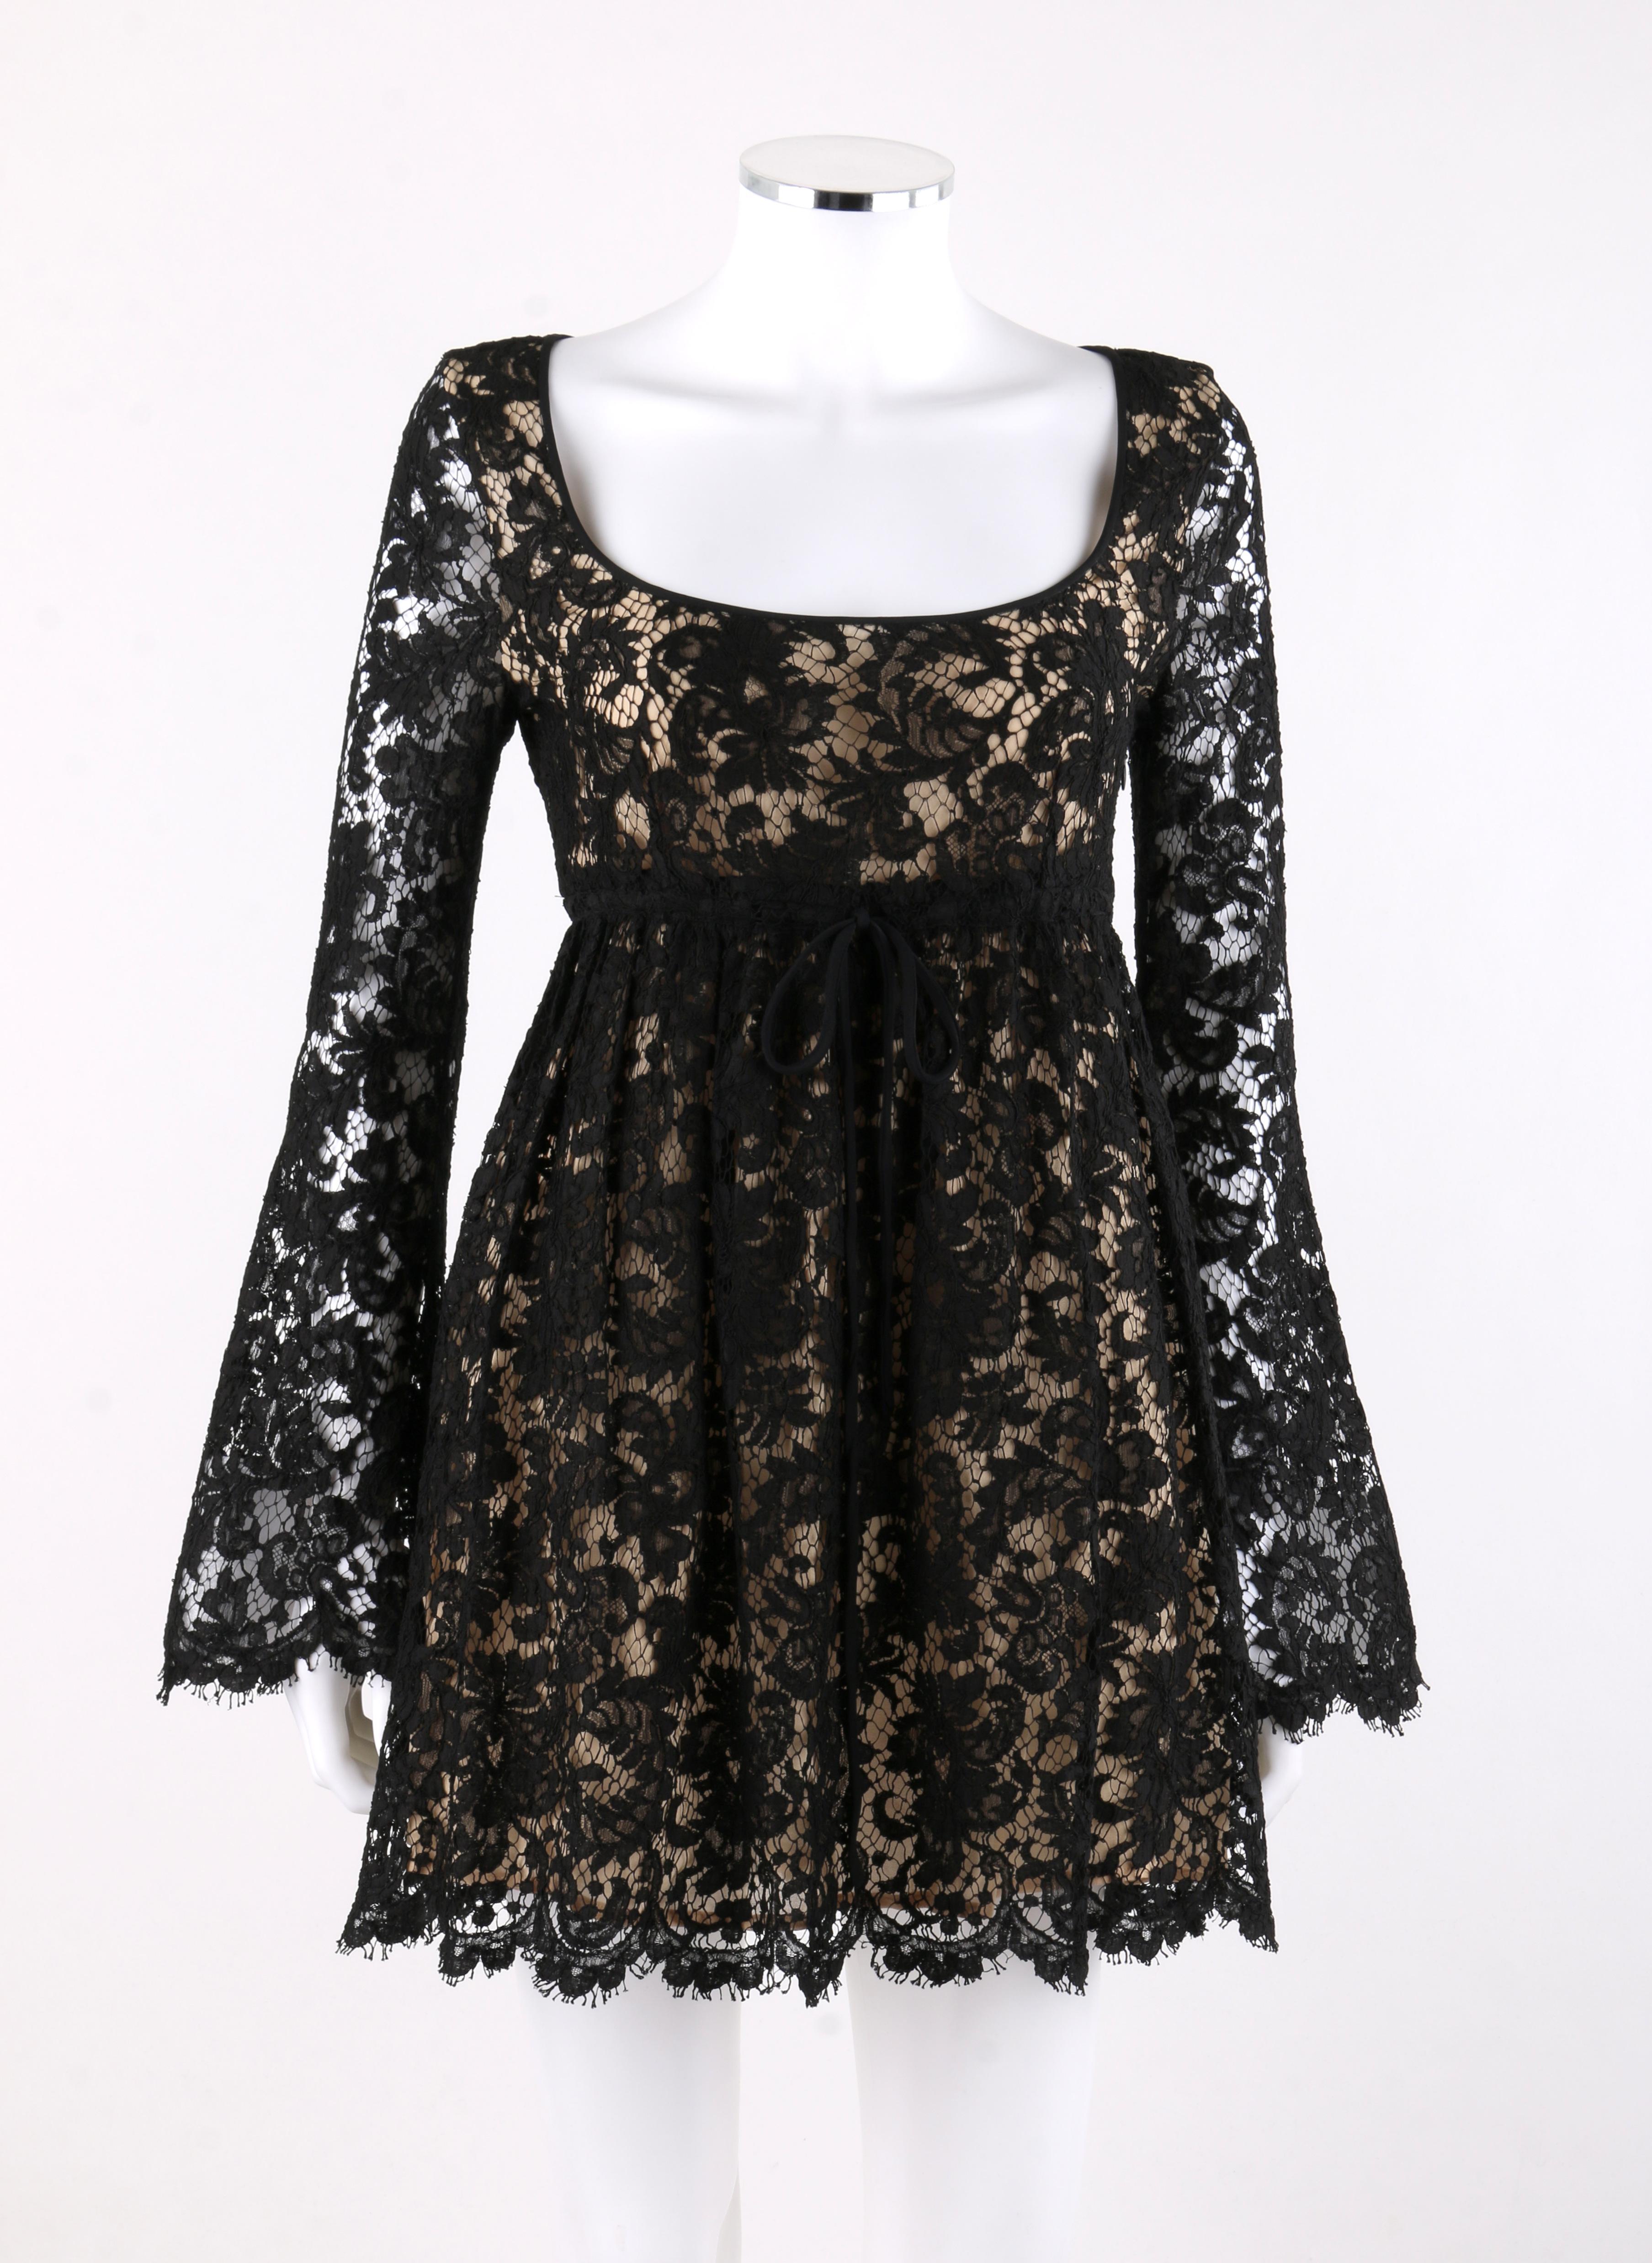 GUCCI Tom Ford S/S 1996 Runway Black Nude Lace Micro Mini Babydoll Dress
 
Brand / Manufacturer: Gucci
Collection: Spring / Summer 1996 
Style: Micro Dress
Color(s): Nude and black
Lined: Yes      
Marked Fabric Content: Composition: 70% Cotton, 20%